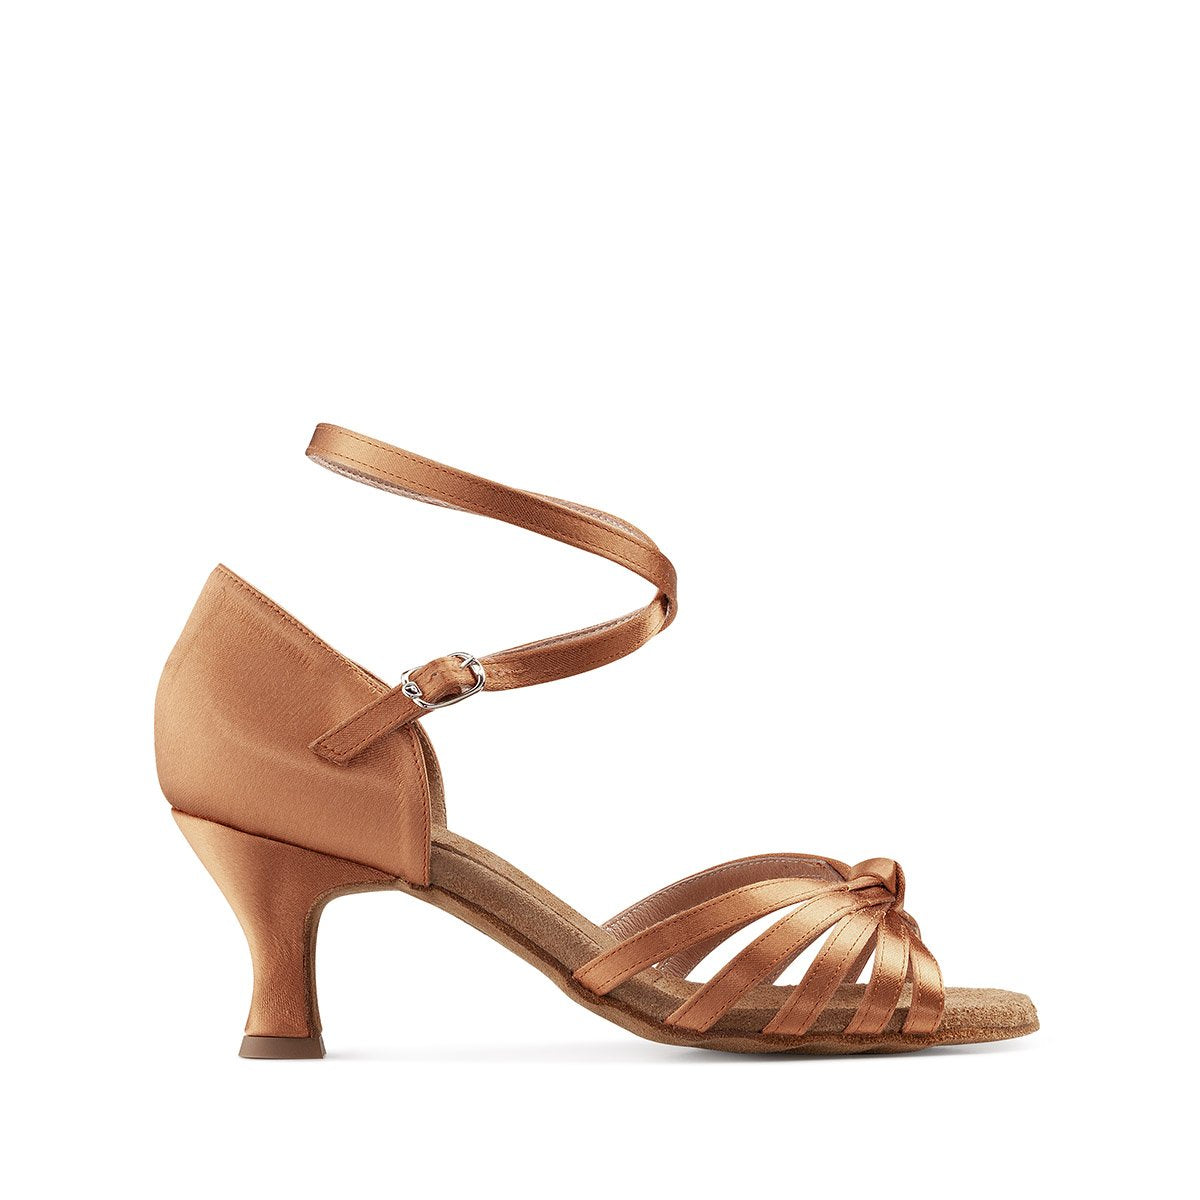 Tan Latin Dance Shoe with Wide Width and Wrap Around Ankle Strap